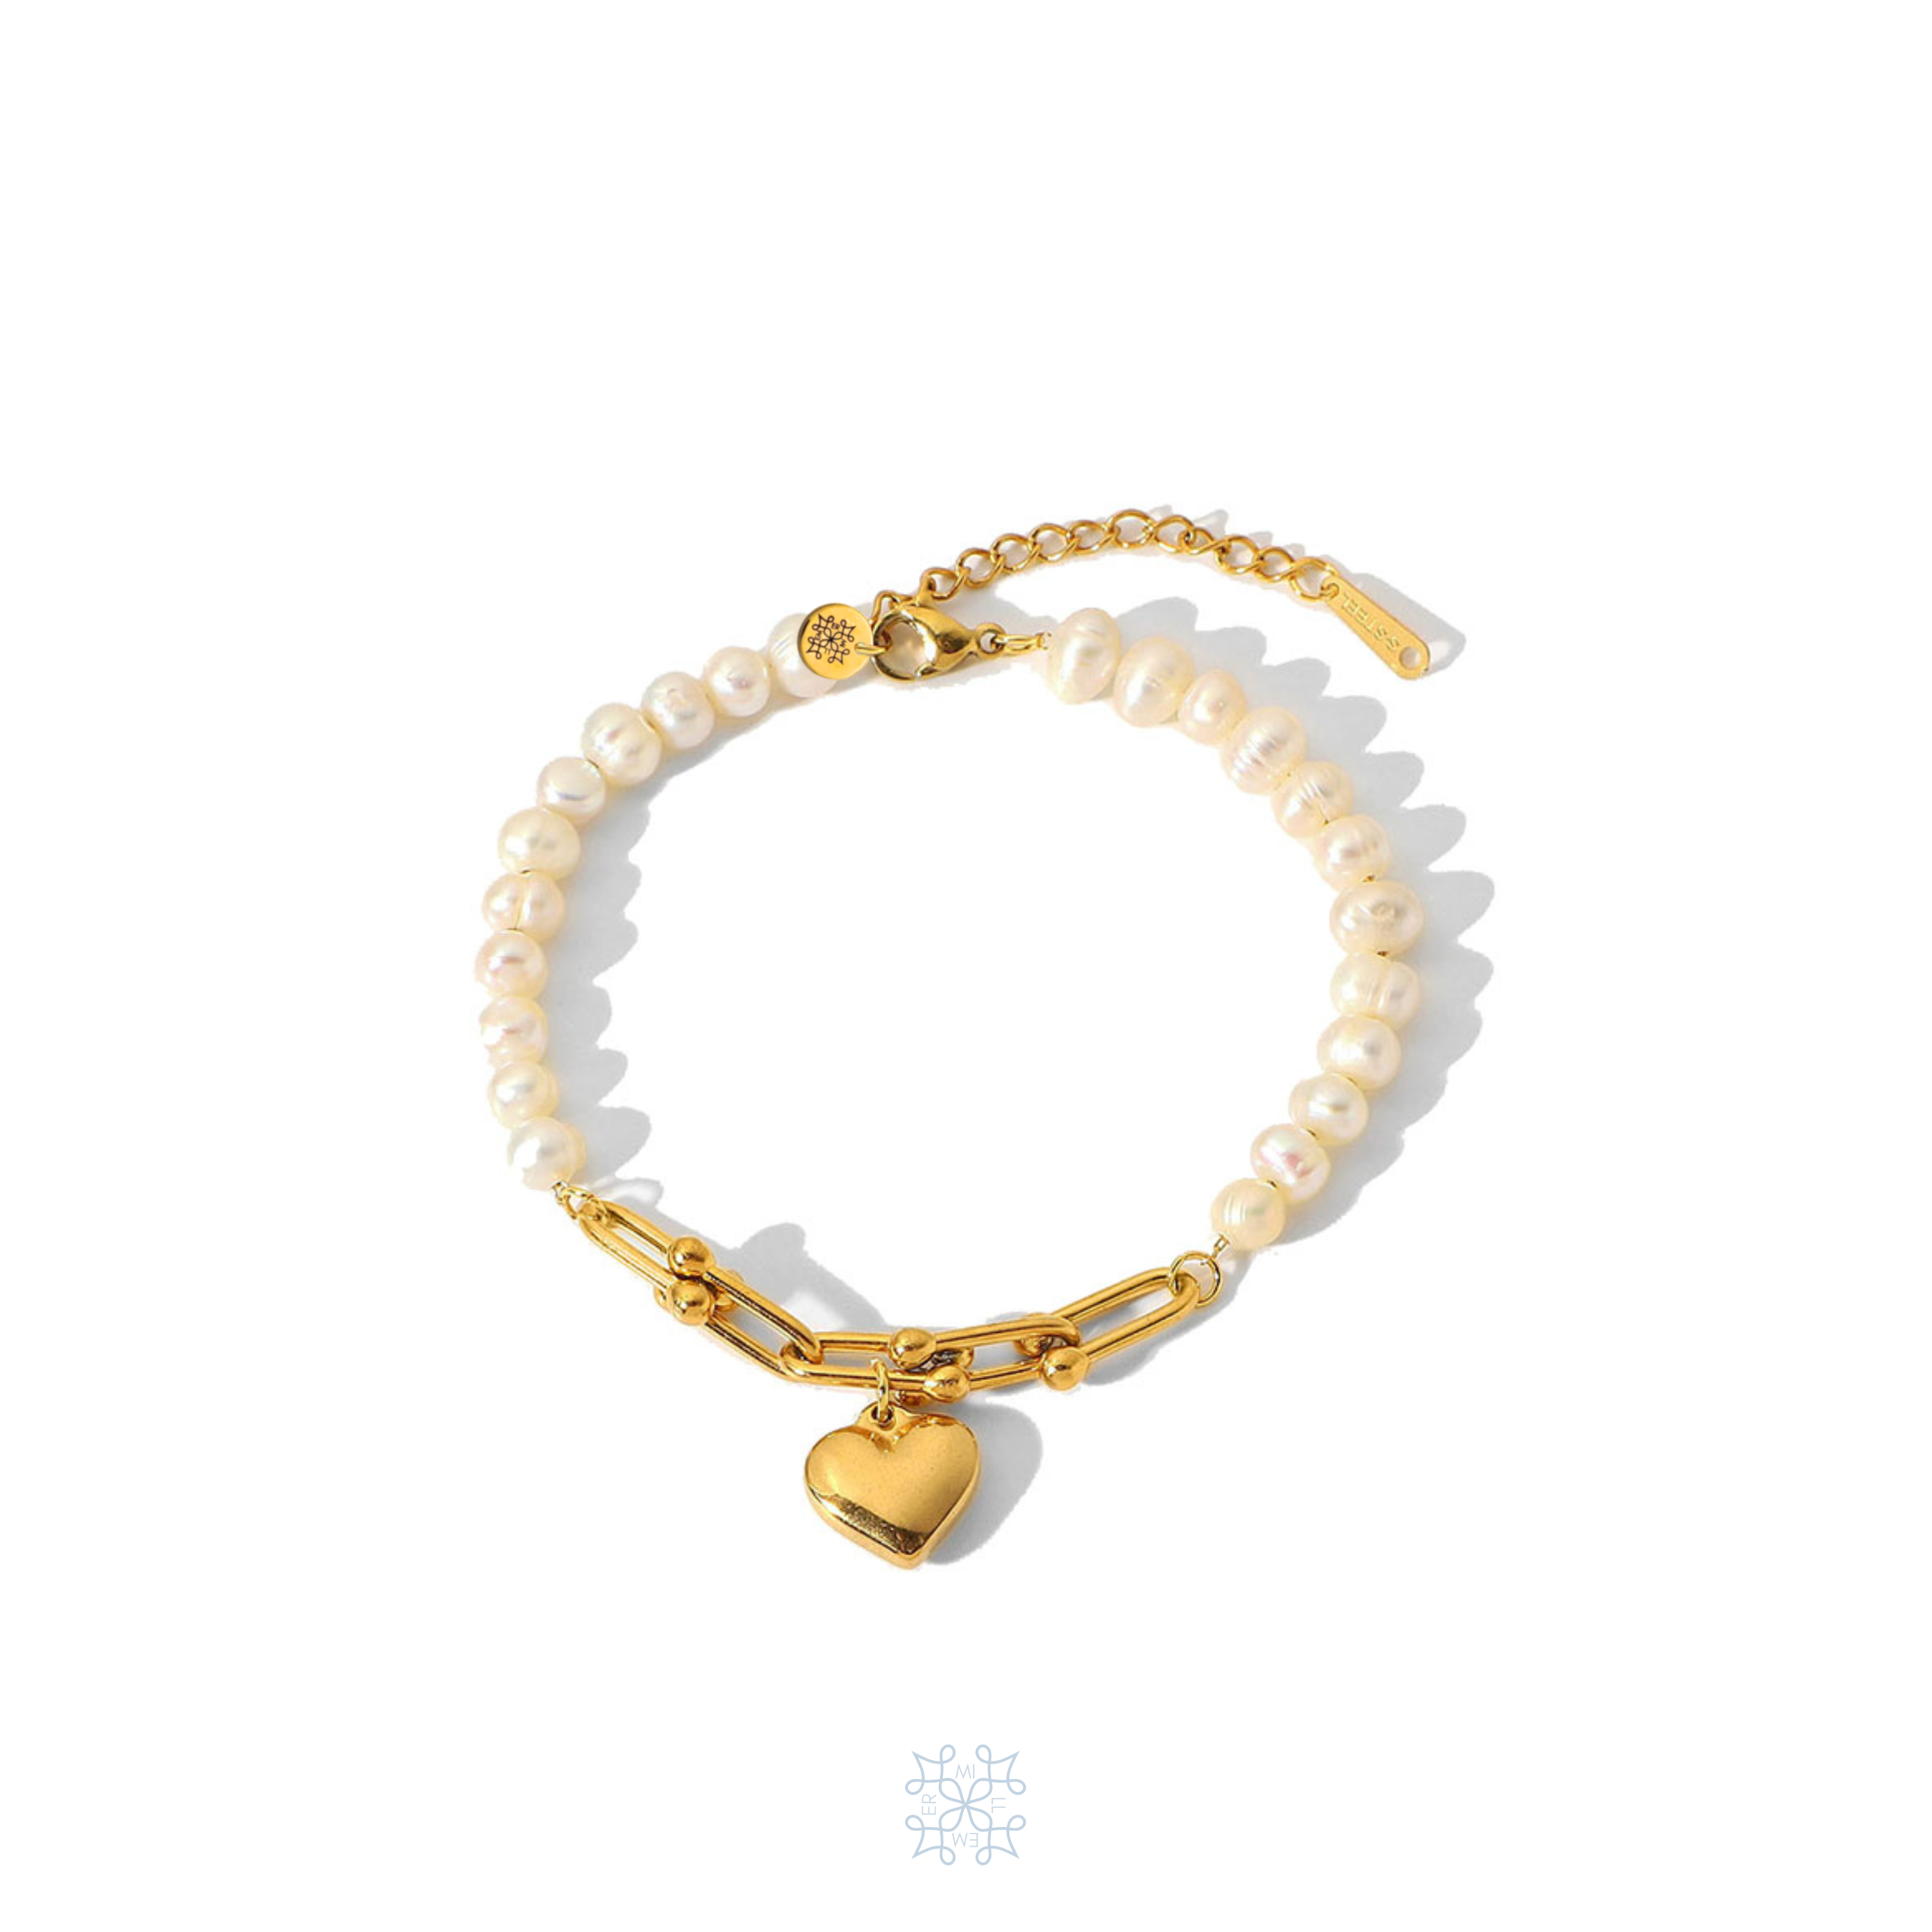 Love Pearl Gold Heart Bracelet. Gold chain and white pearls bracelet with a heart pendant in the middle of the chain part.